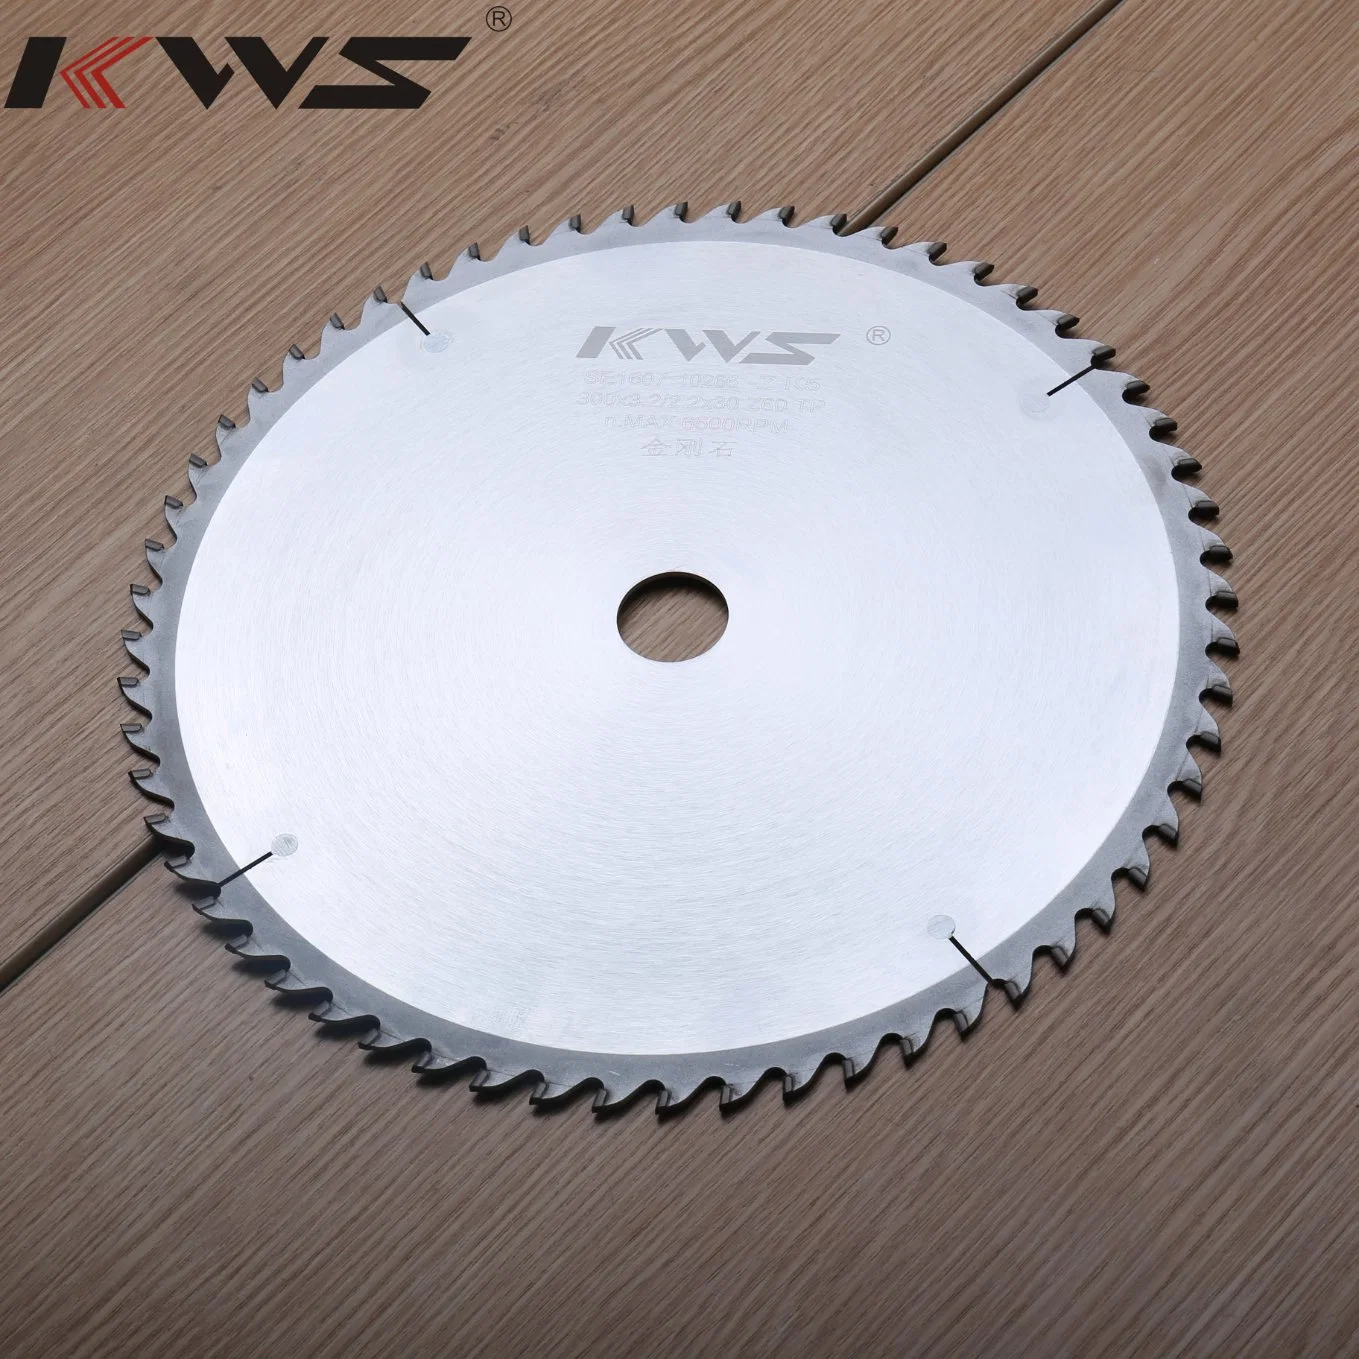 Kws PCD Diamond Circular Cutting Saw Blade for Wood Composites Panel Sizing Cutter Wood Carving Working Disc Diamantado Tool